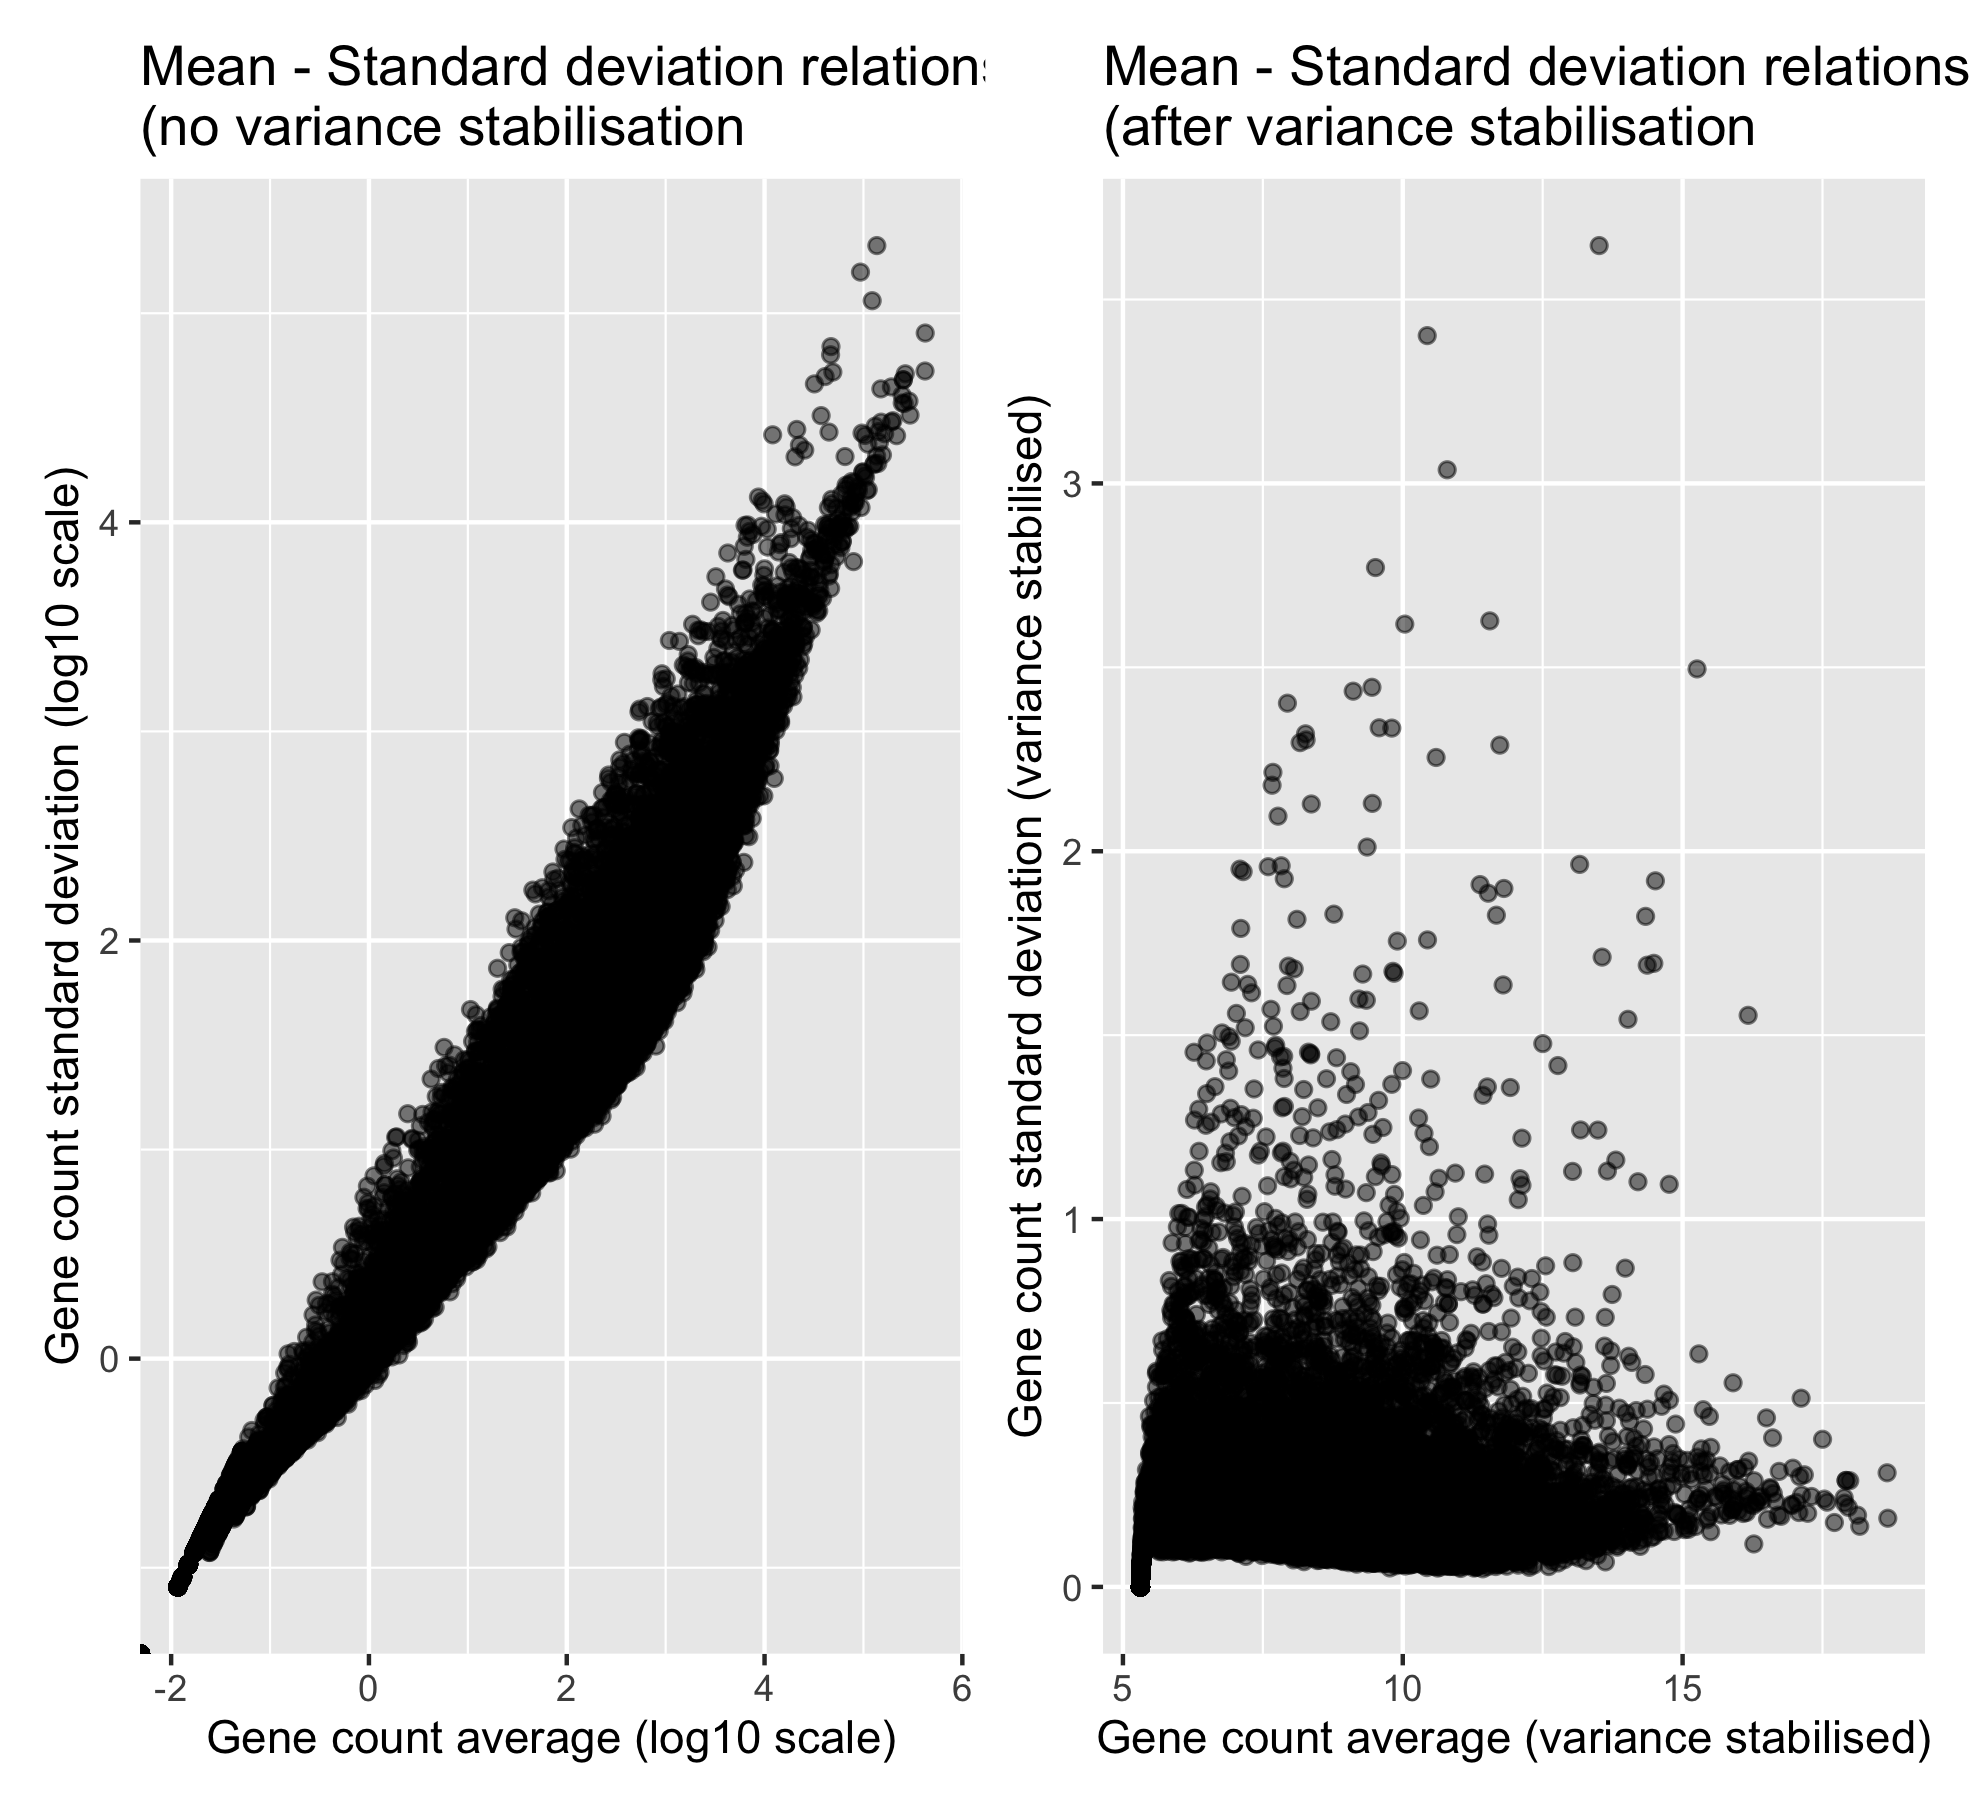 comparison mean-sd relationship before and after variance stabilisation